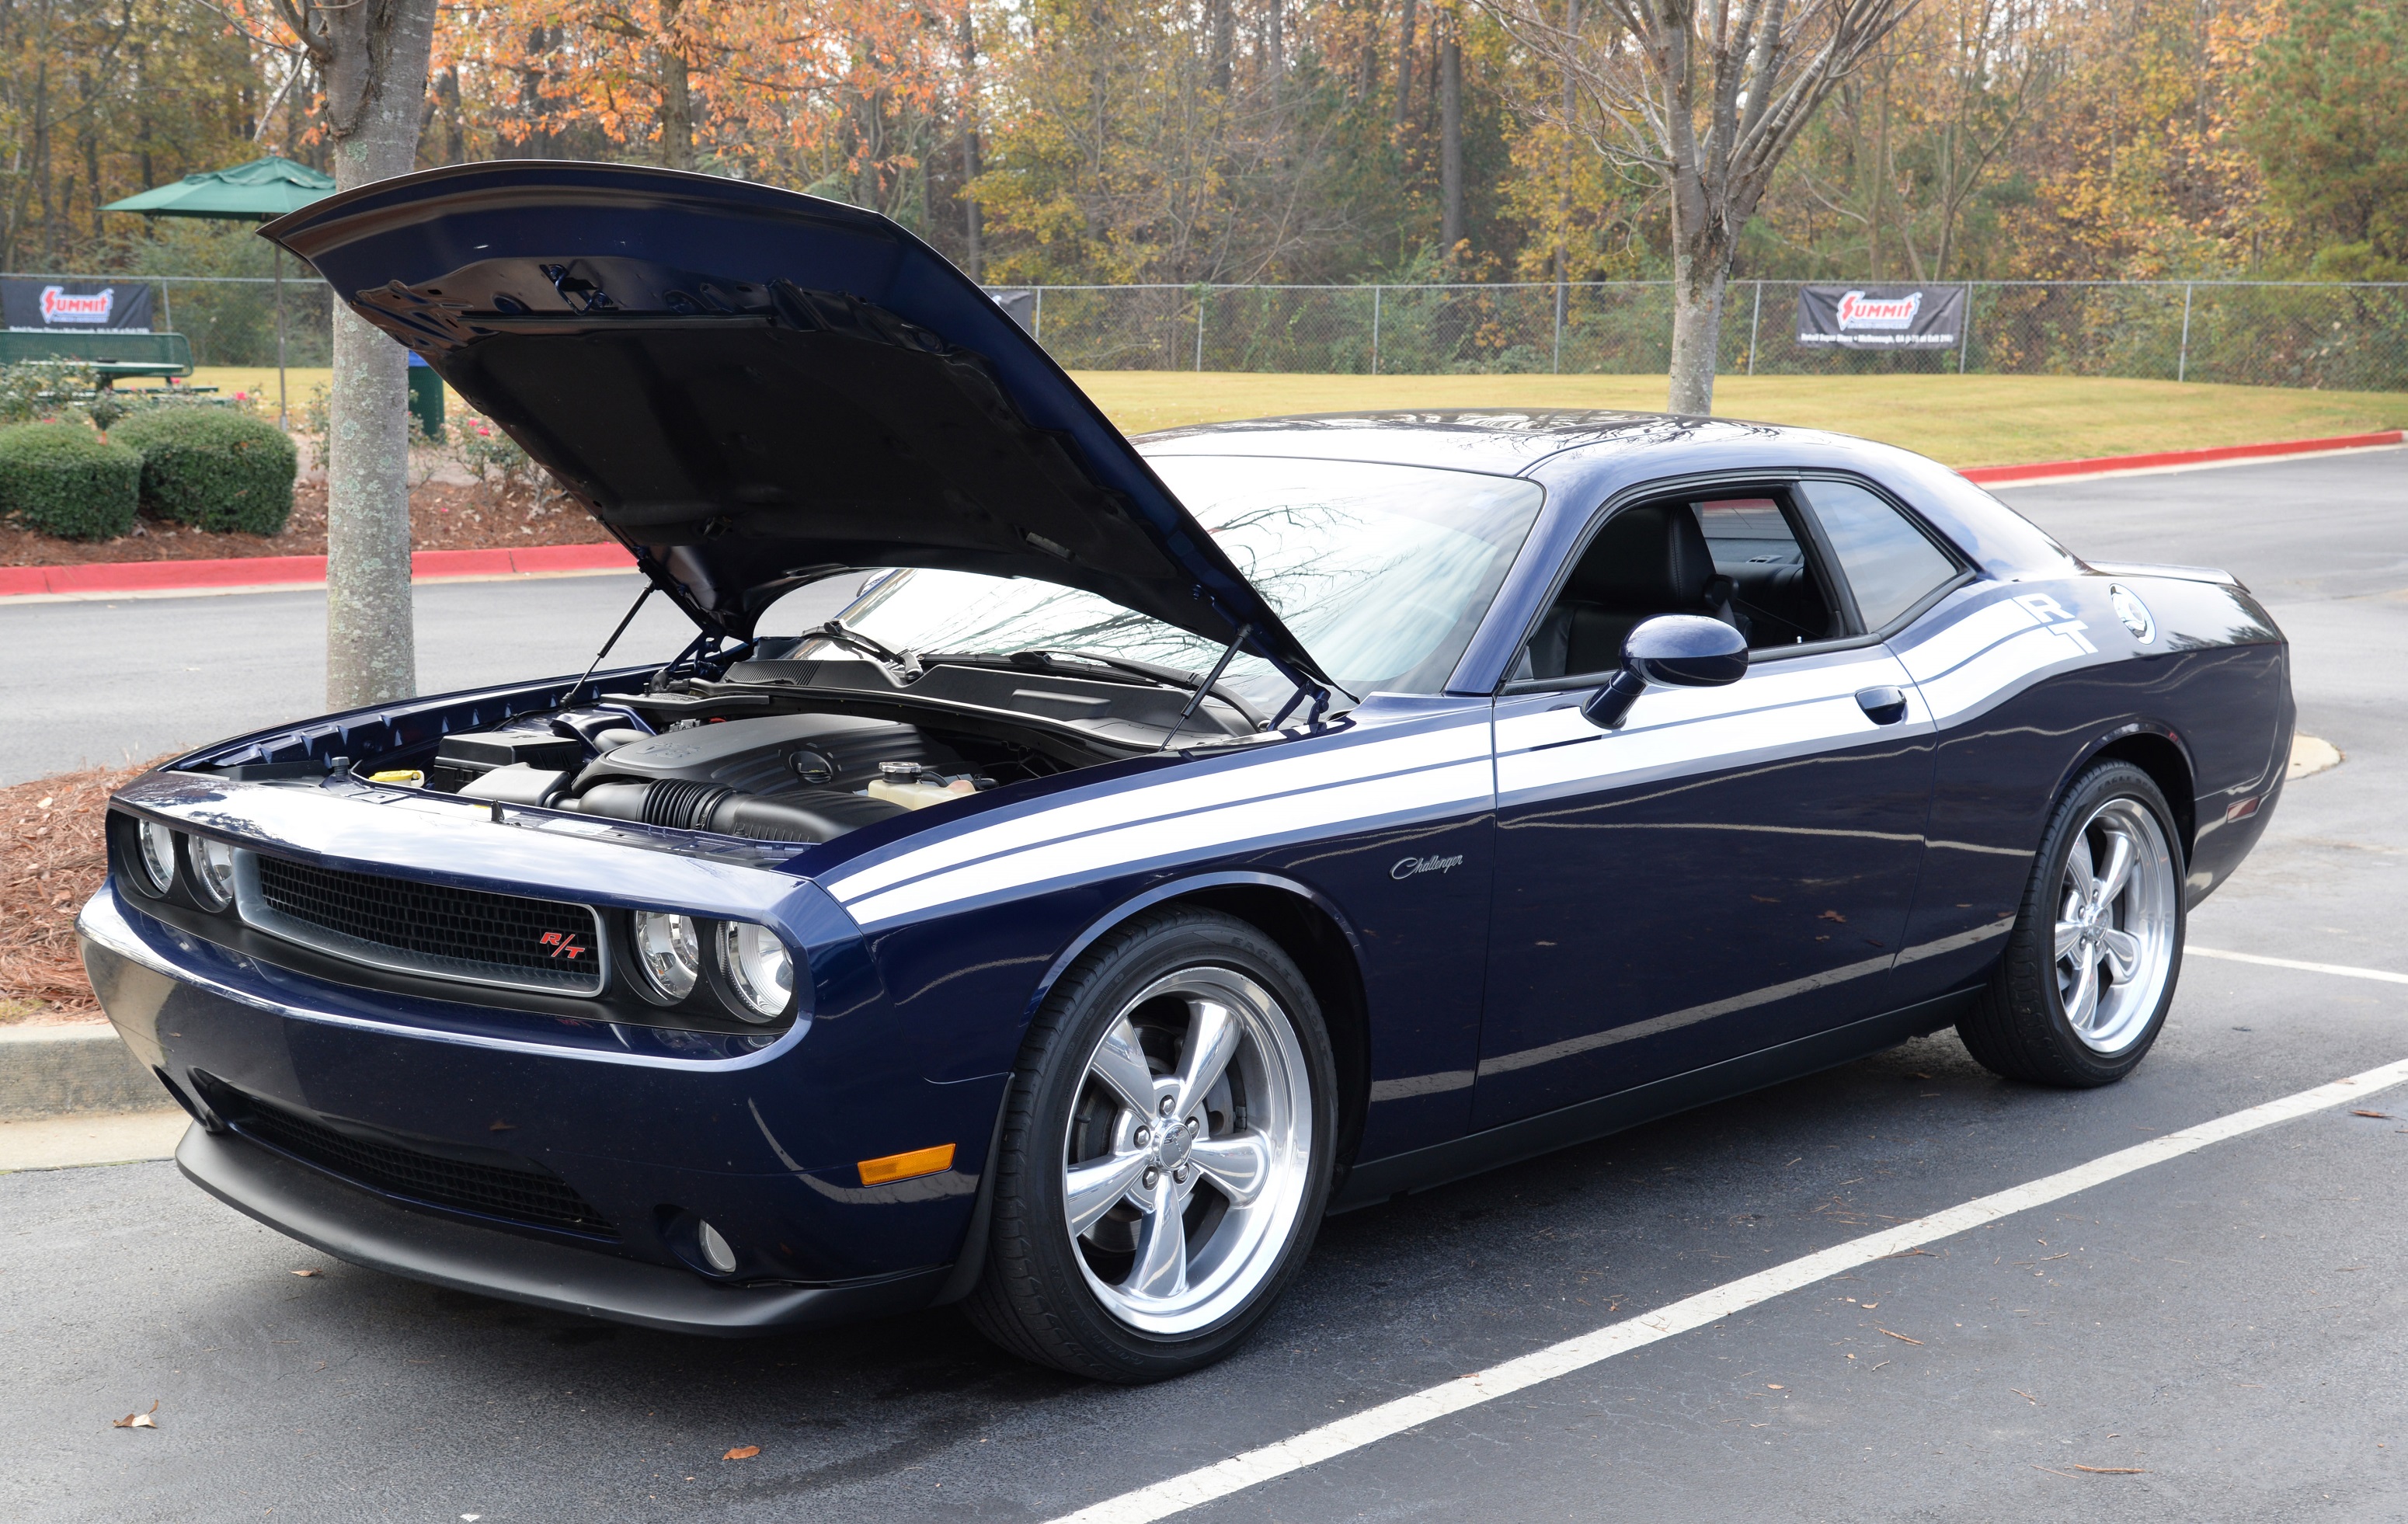 Toys for Tots Cruise In Challenger